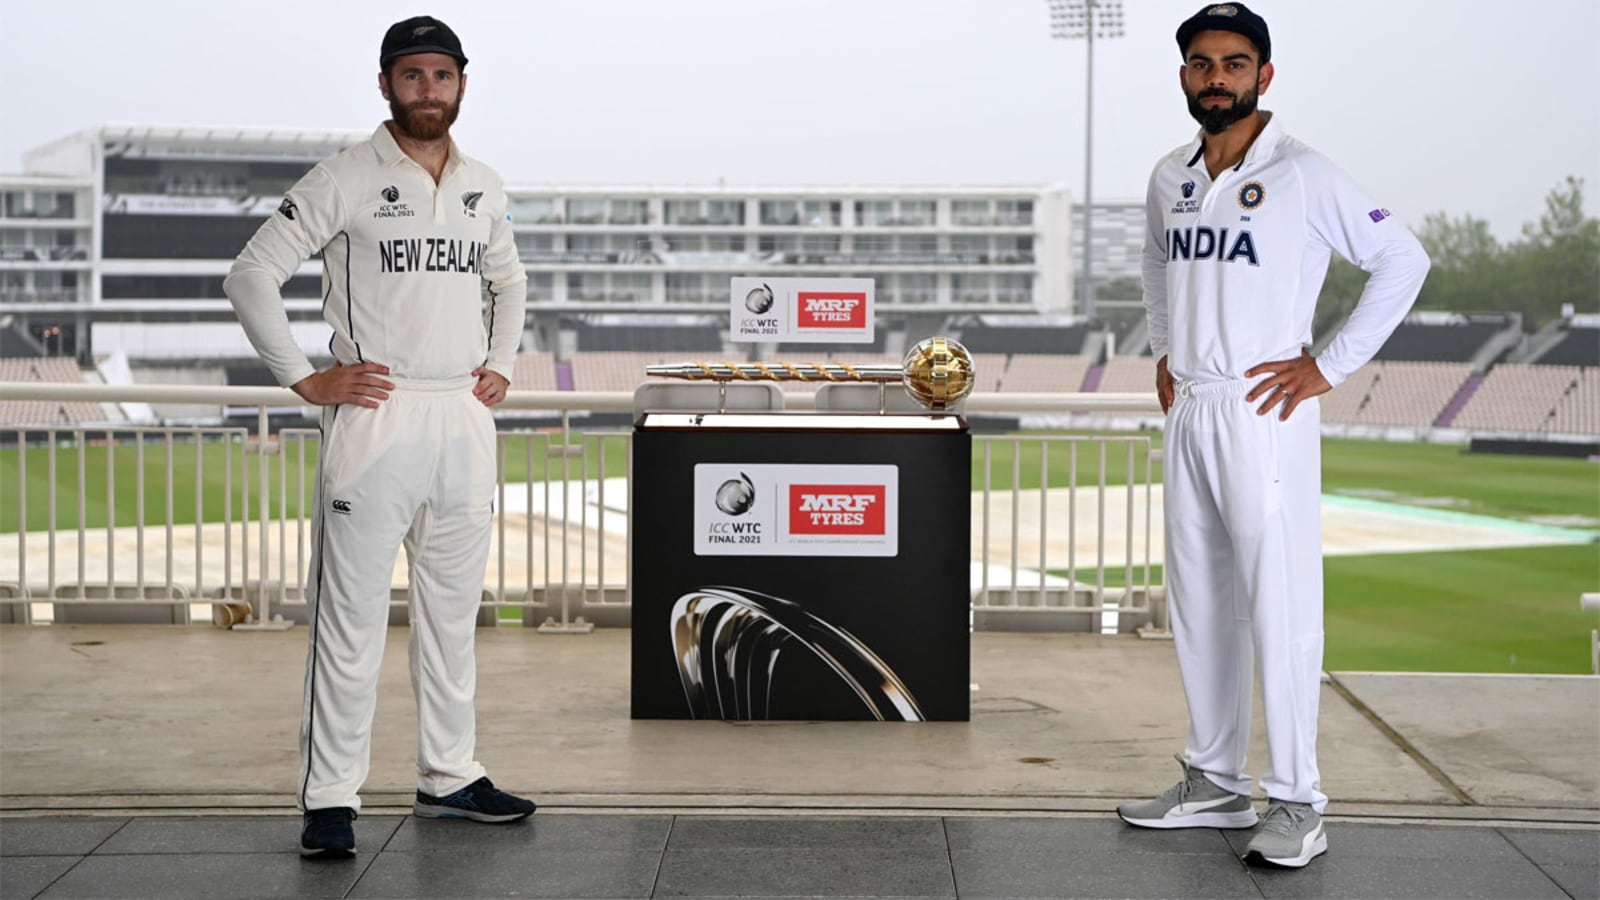 India vs New Zealand, WTC Final Test Live Streaming When and where to